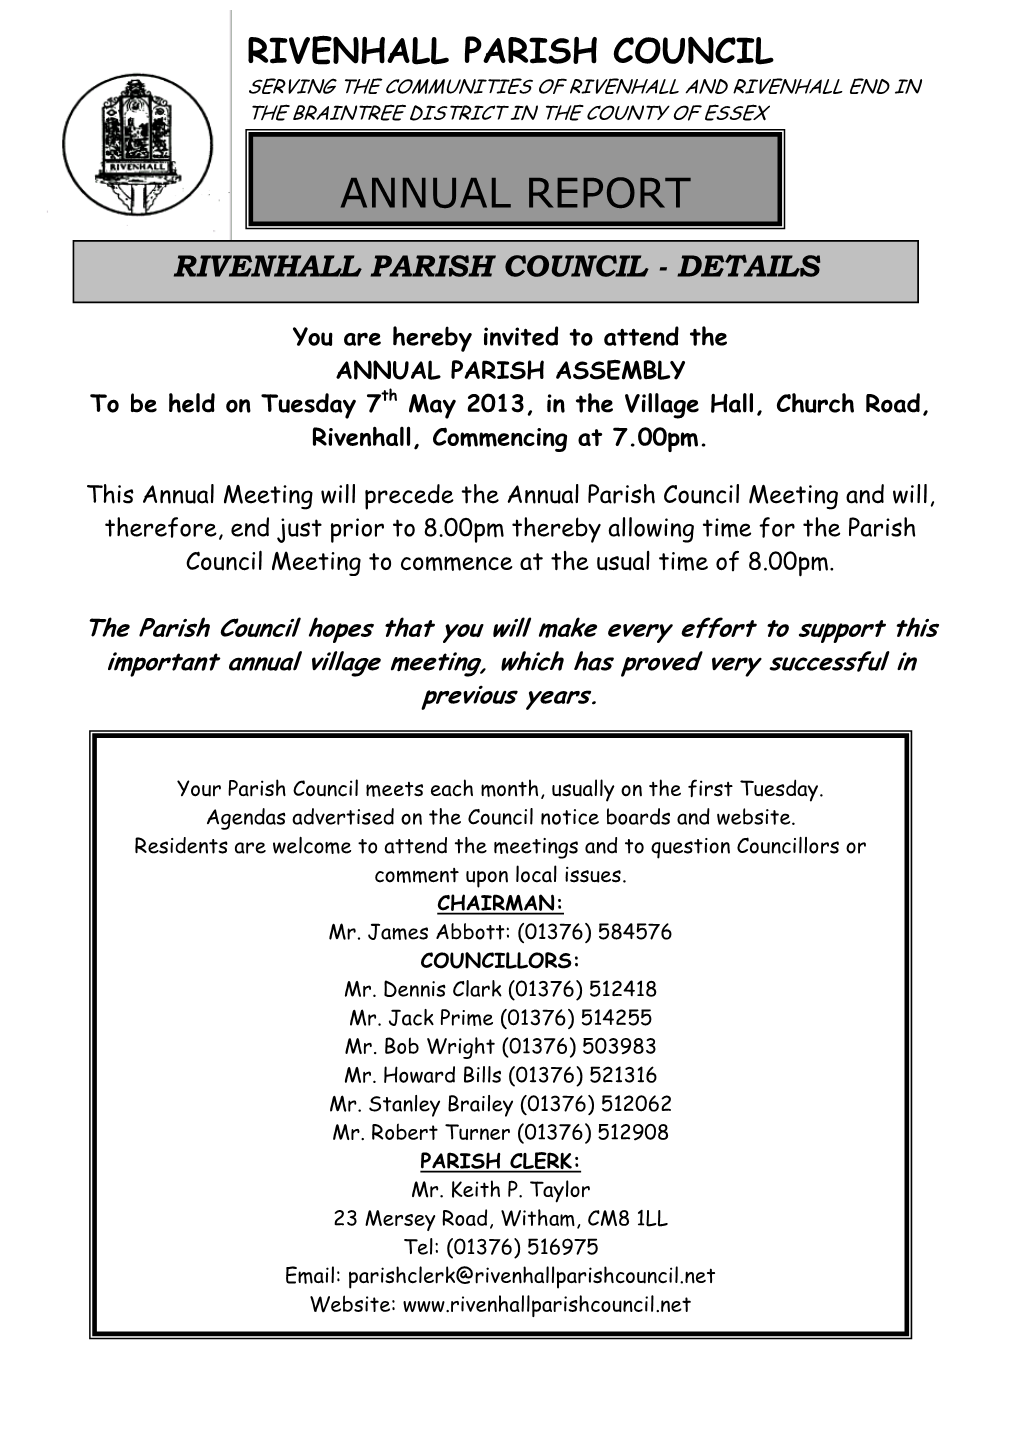 Rivenhall Parish Council Serving the Communities of Rivenhall and Rivenhall End in the Braintree District in the County of Essex